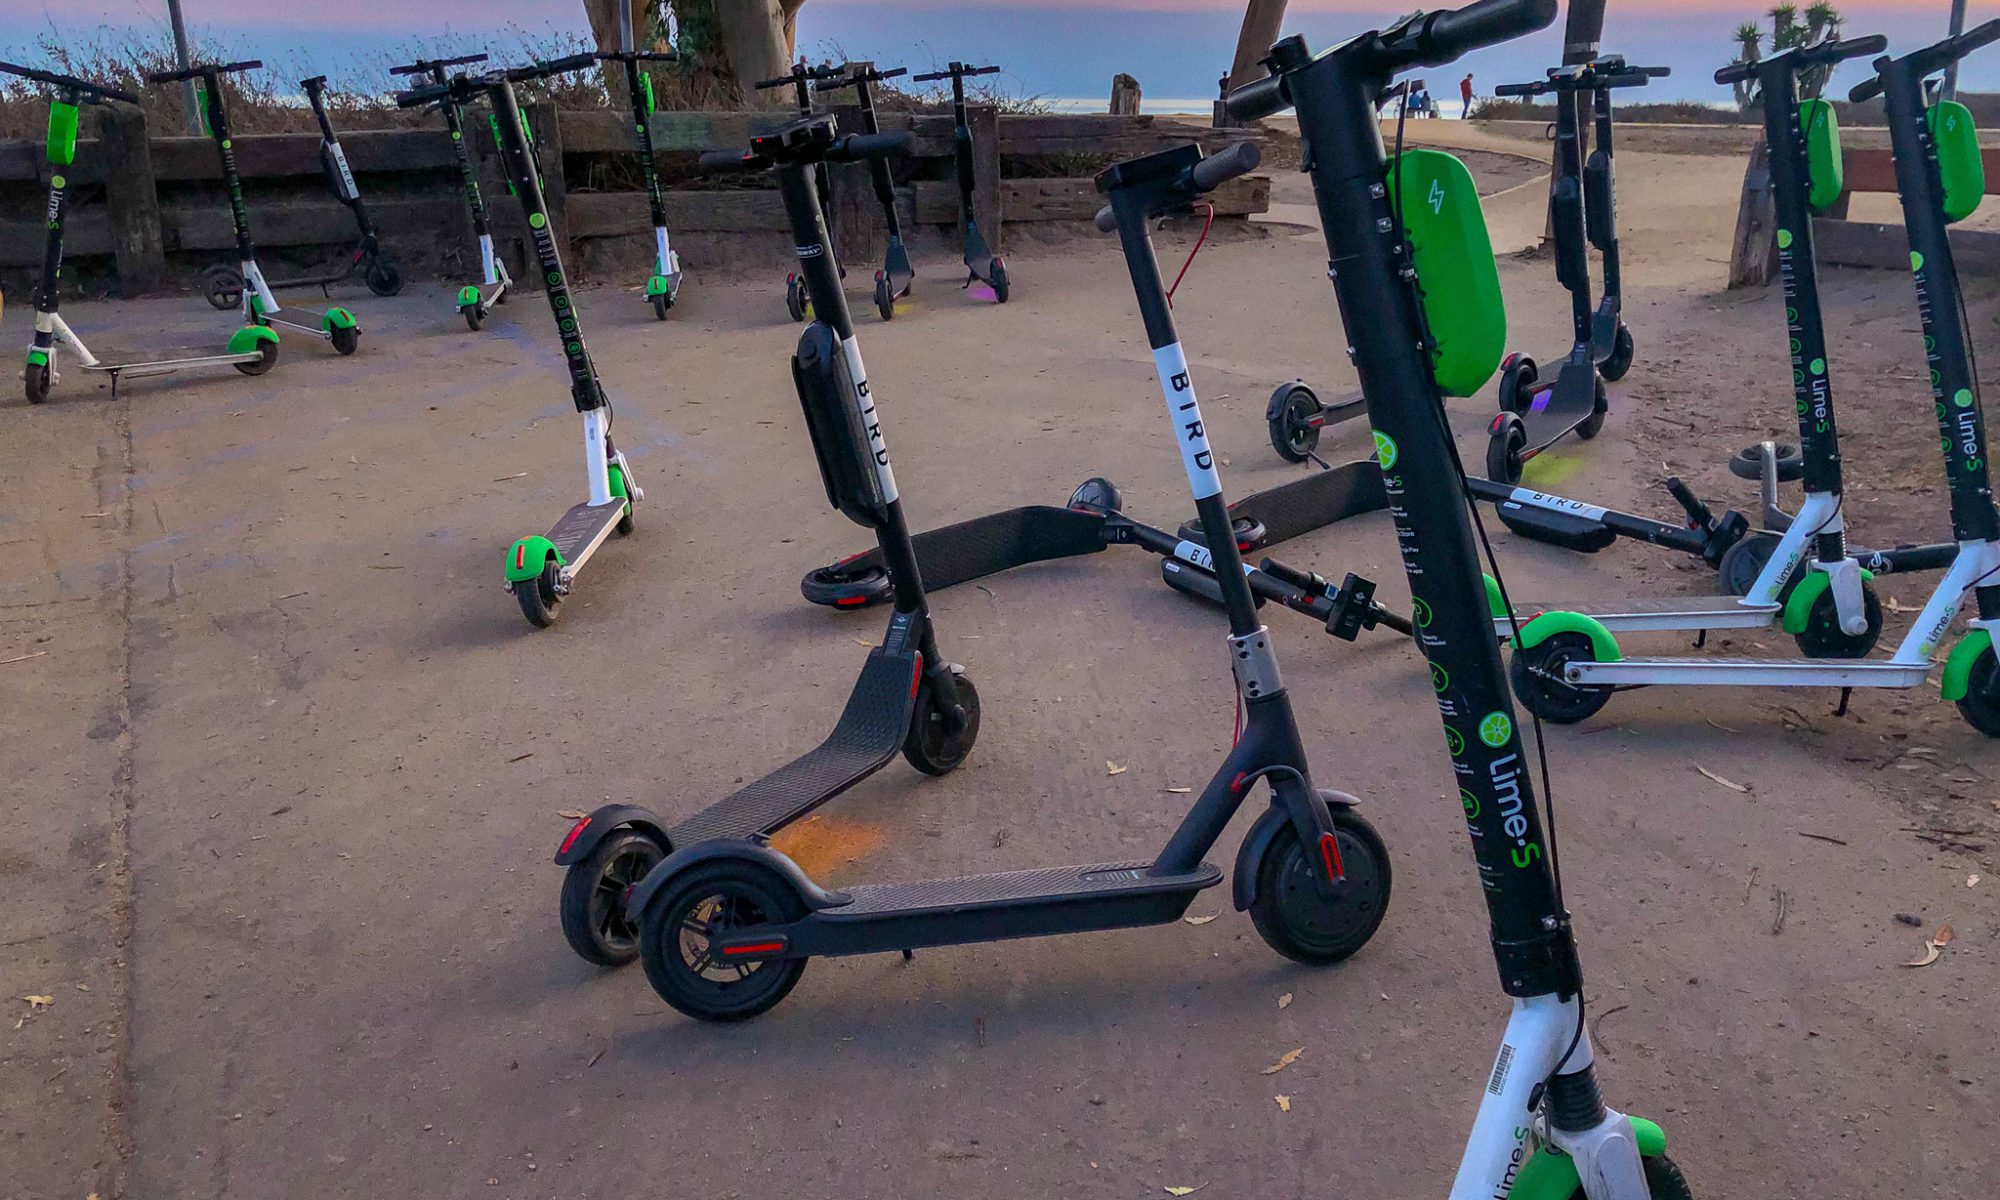 Photograph of several dockless scooters on an area of pavement with a sunset sky in the background